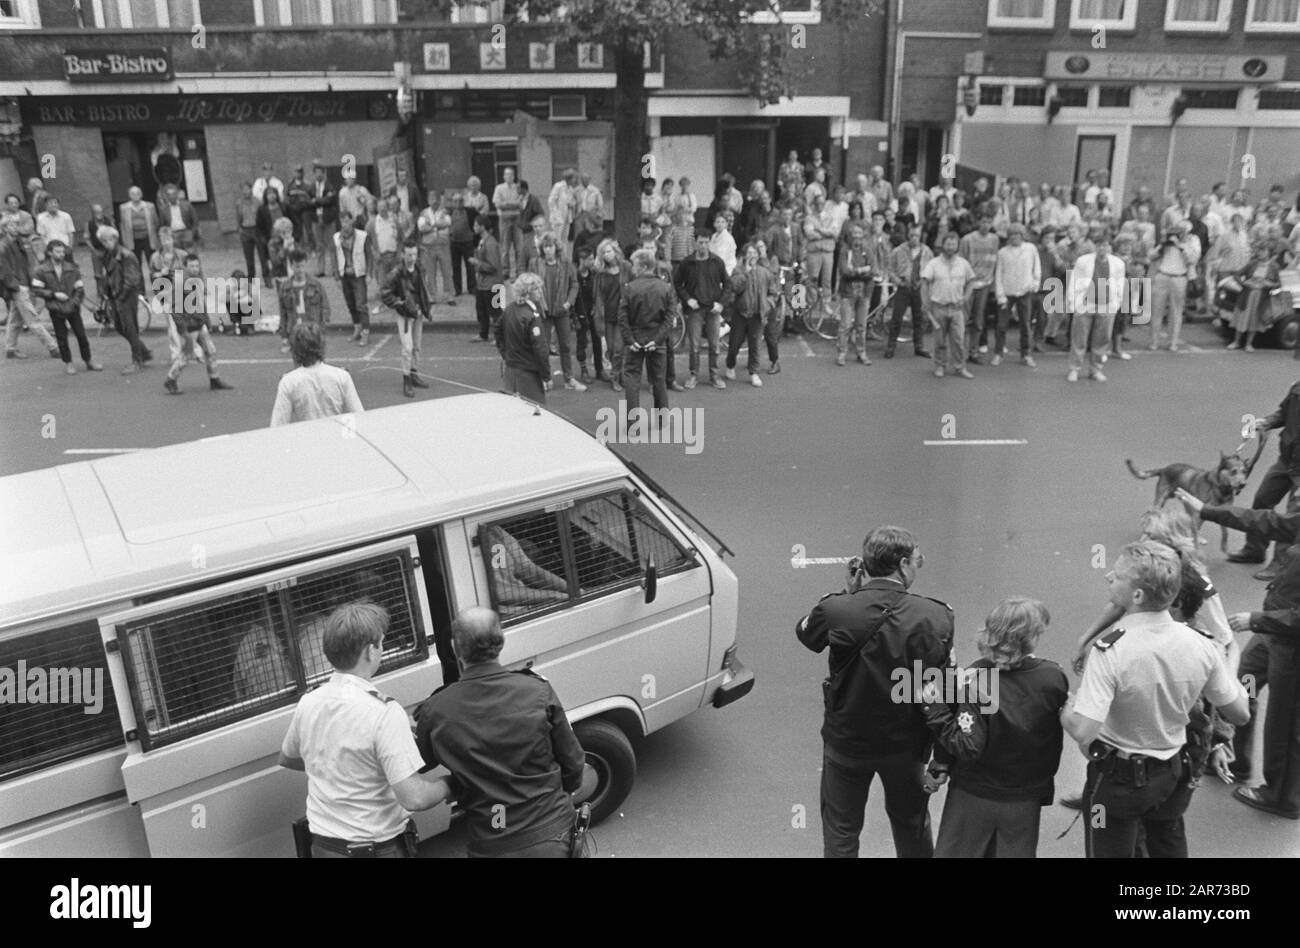 Eventing squatbuilding Scheldestraat 100 in Amsterdam; overview during arrest squatters Date: August 12, 1986 Location: Amsterdam, Noord-Holland Keywords: KRAKERS, arrests, squats , overviews Stock Photo